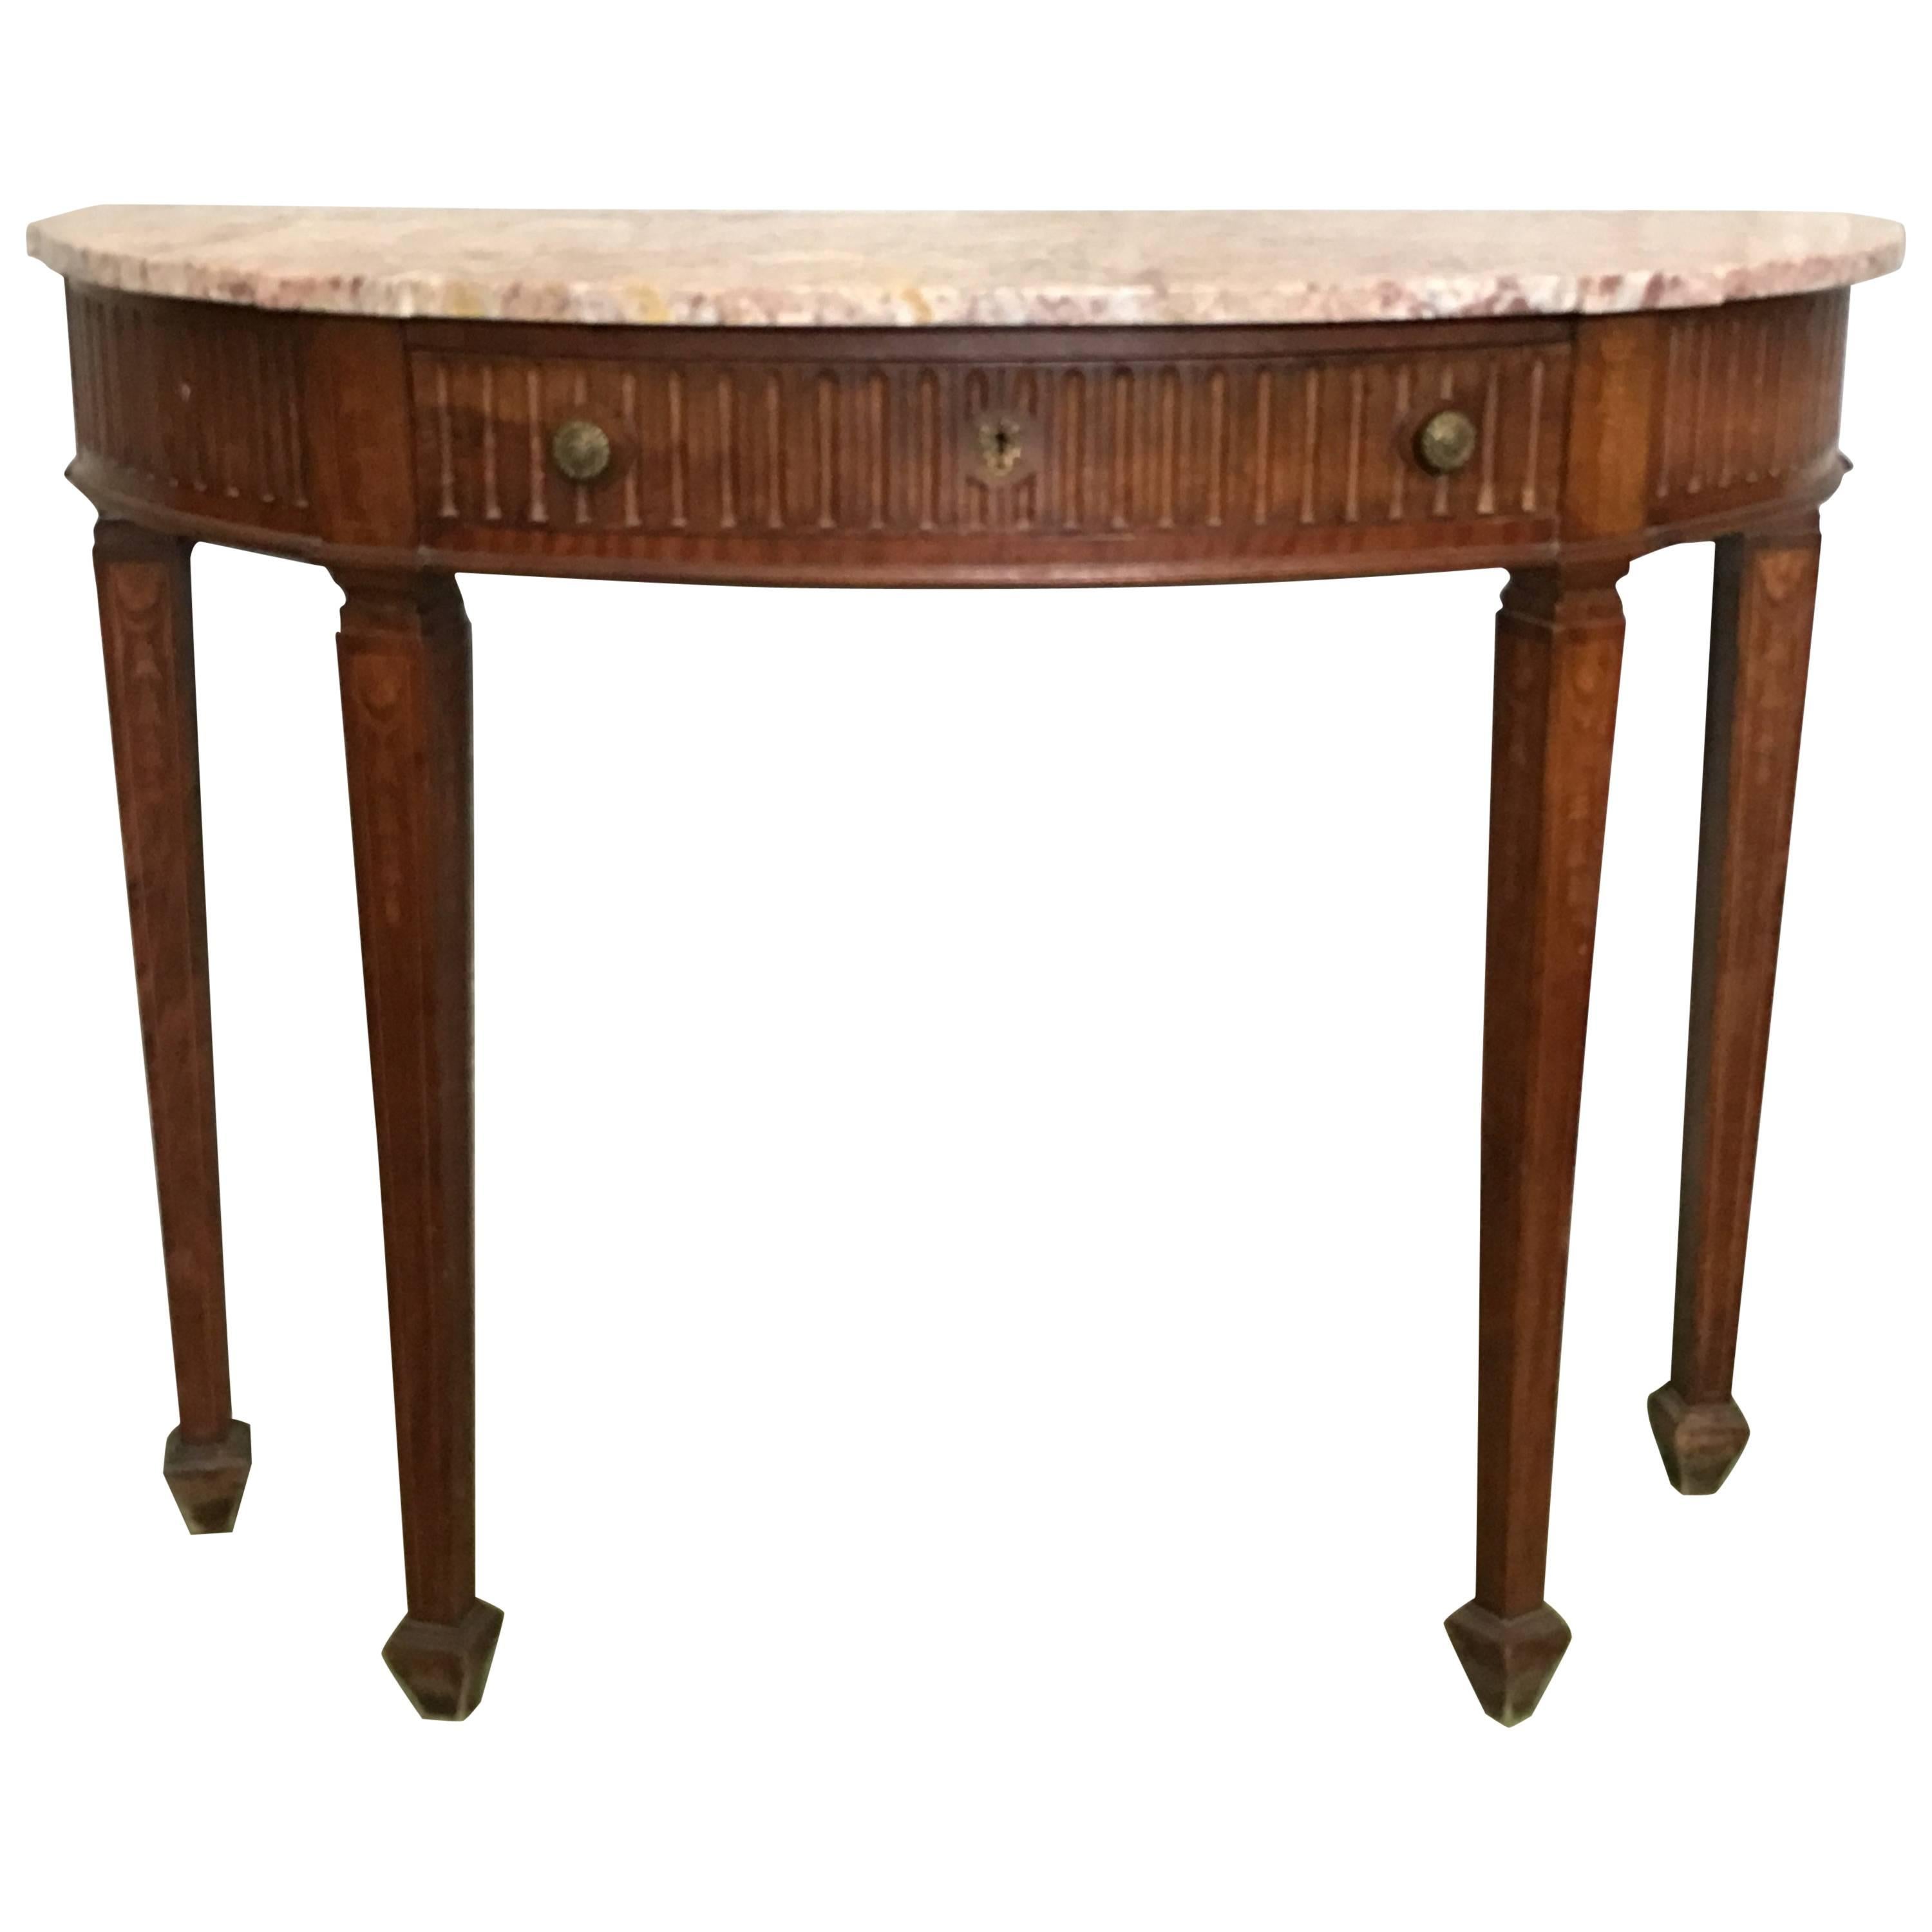 20th Century French Mahogany Console Table with Top Table and Drawer